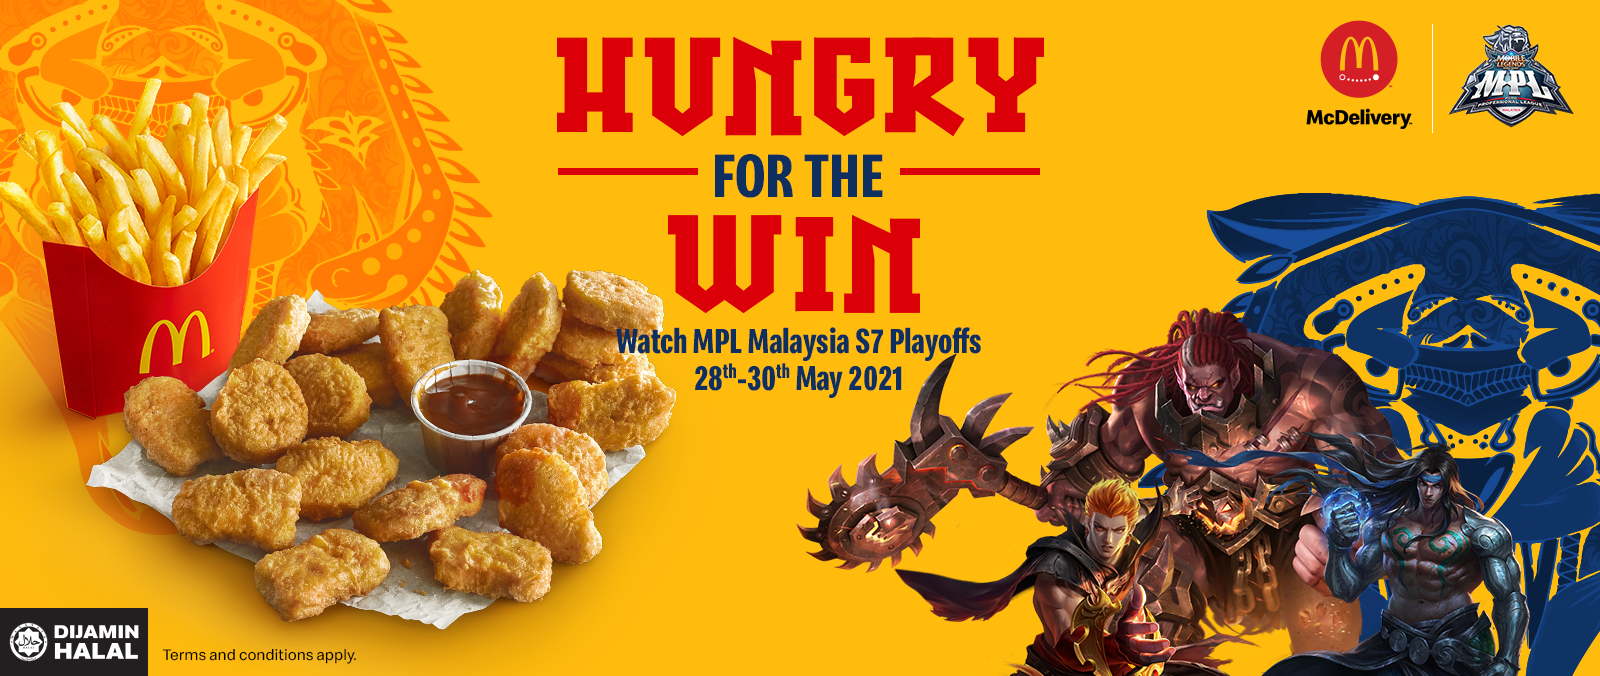 McDelivery teams up with Mobile Legends for an epic feast this May!'s image'